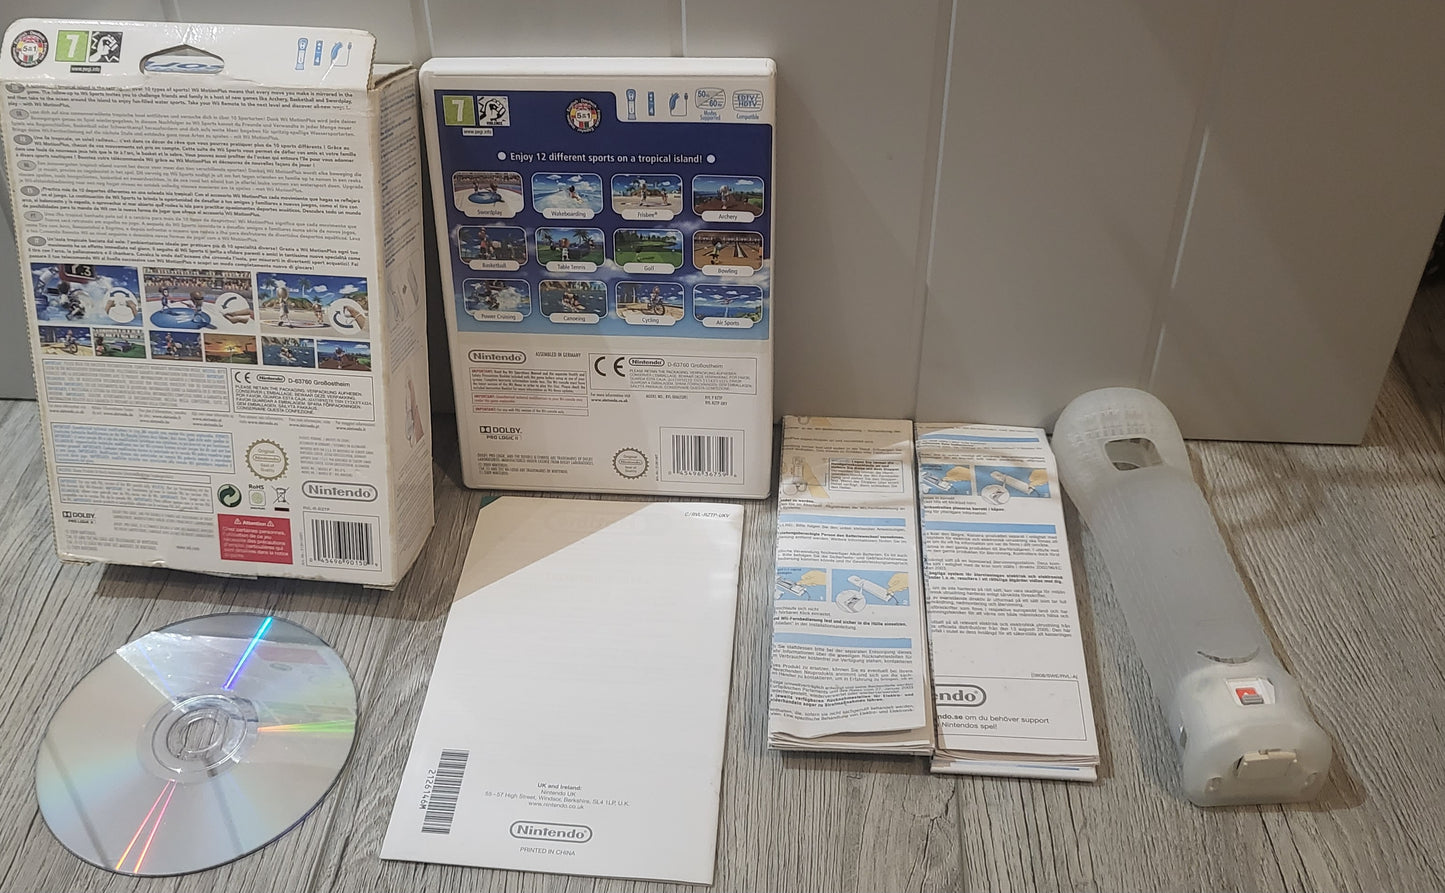 Boxed Wii Sports Resort with MotionPlus Nintendo Wii Game & Accessory